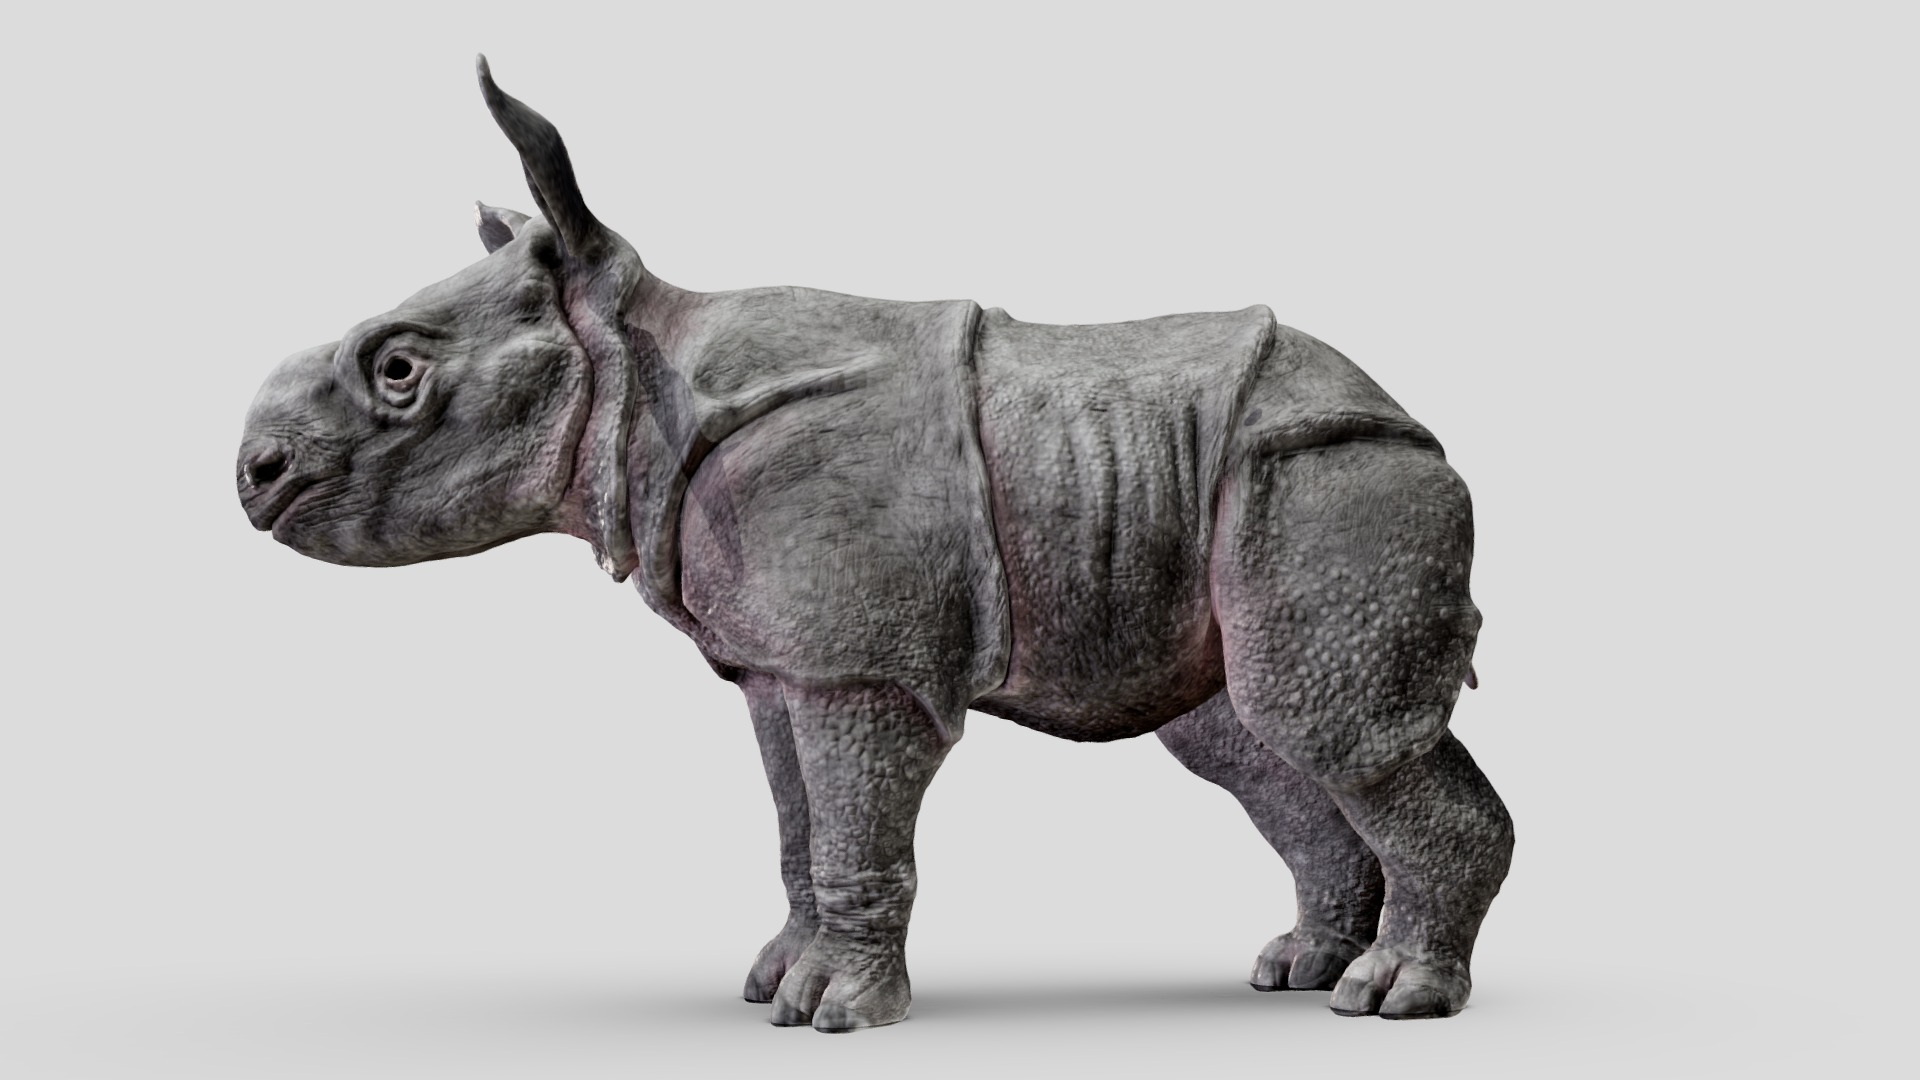 3D model Indian rhino baby. Third of five. - This is a 3D model of the Indian rhino baby. Third of five.. The 3D model is about a grey animal with horns.